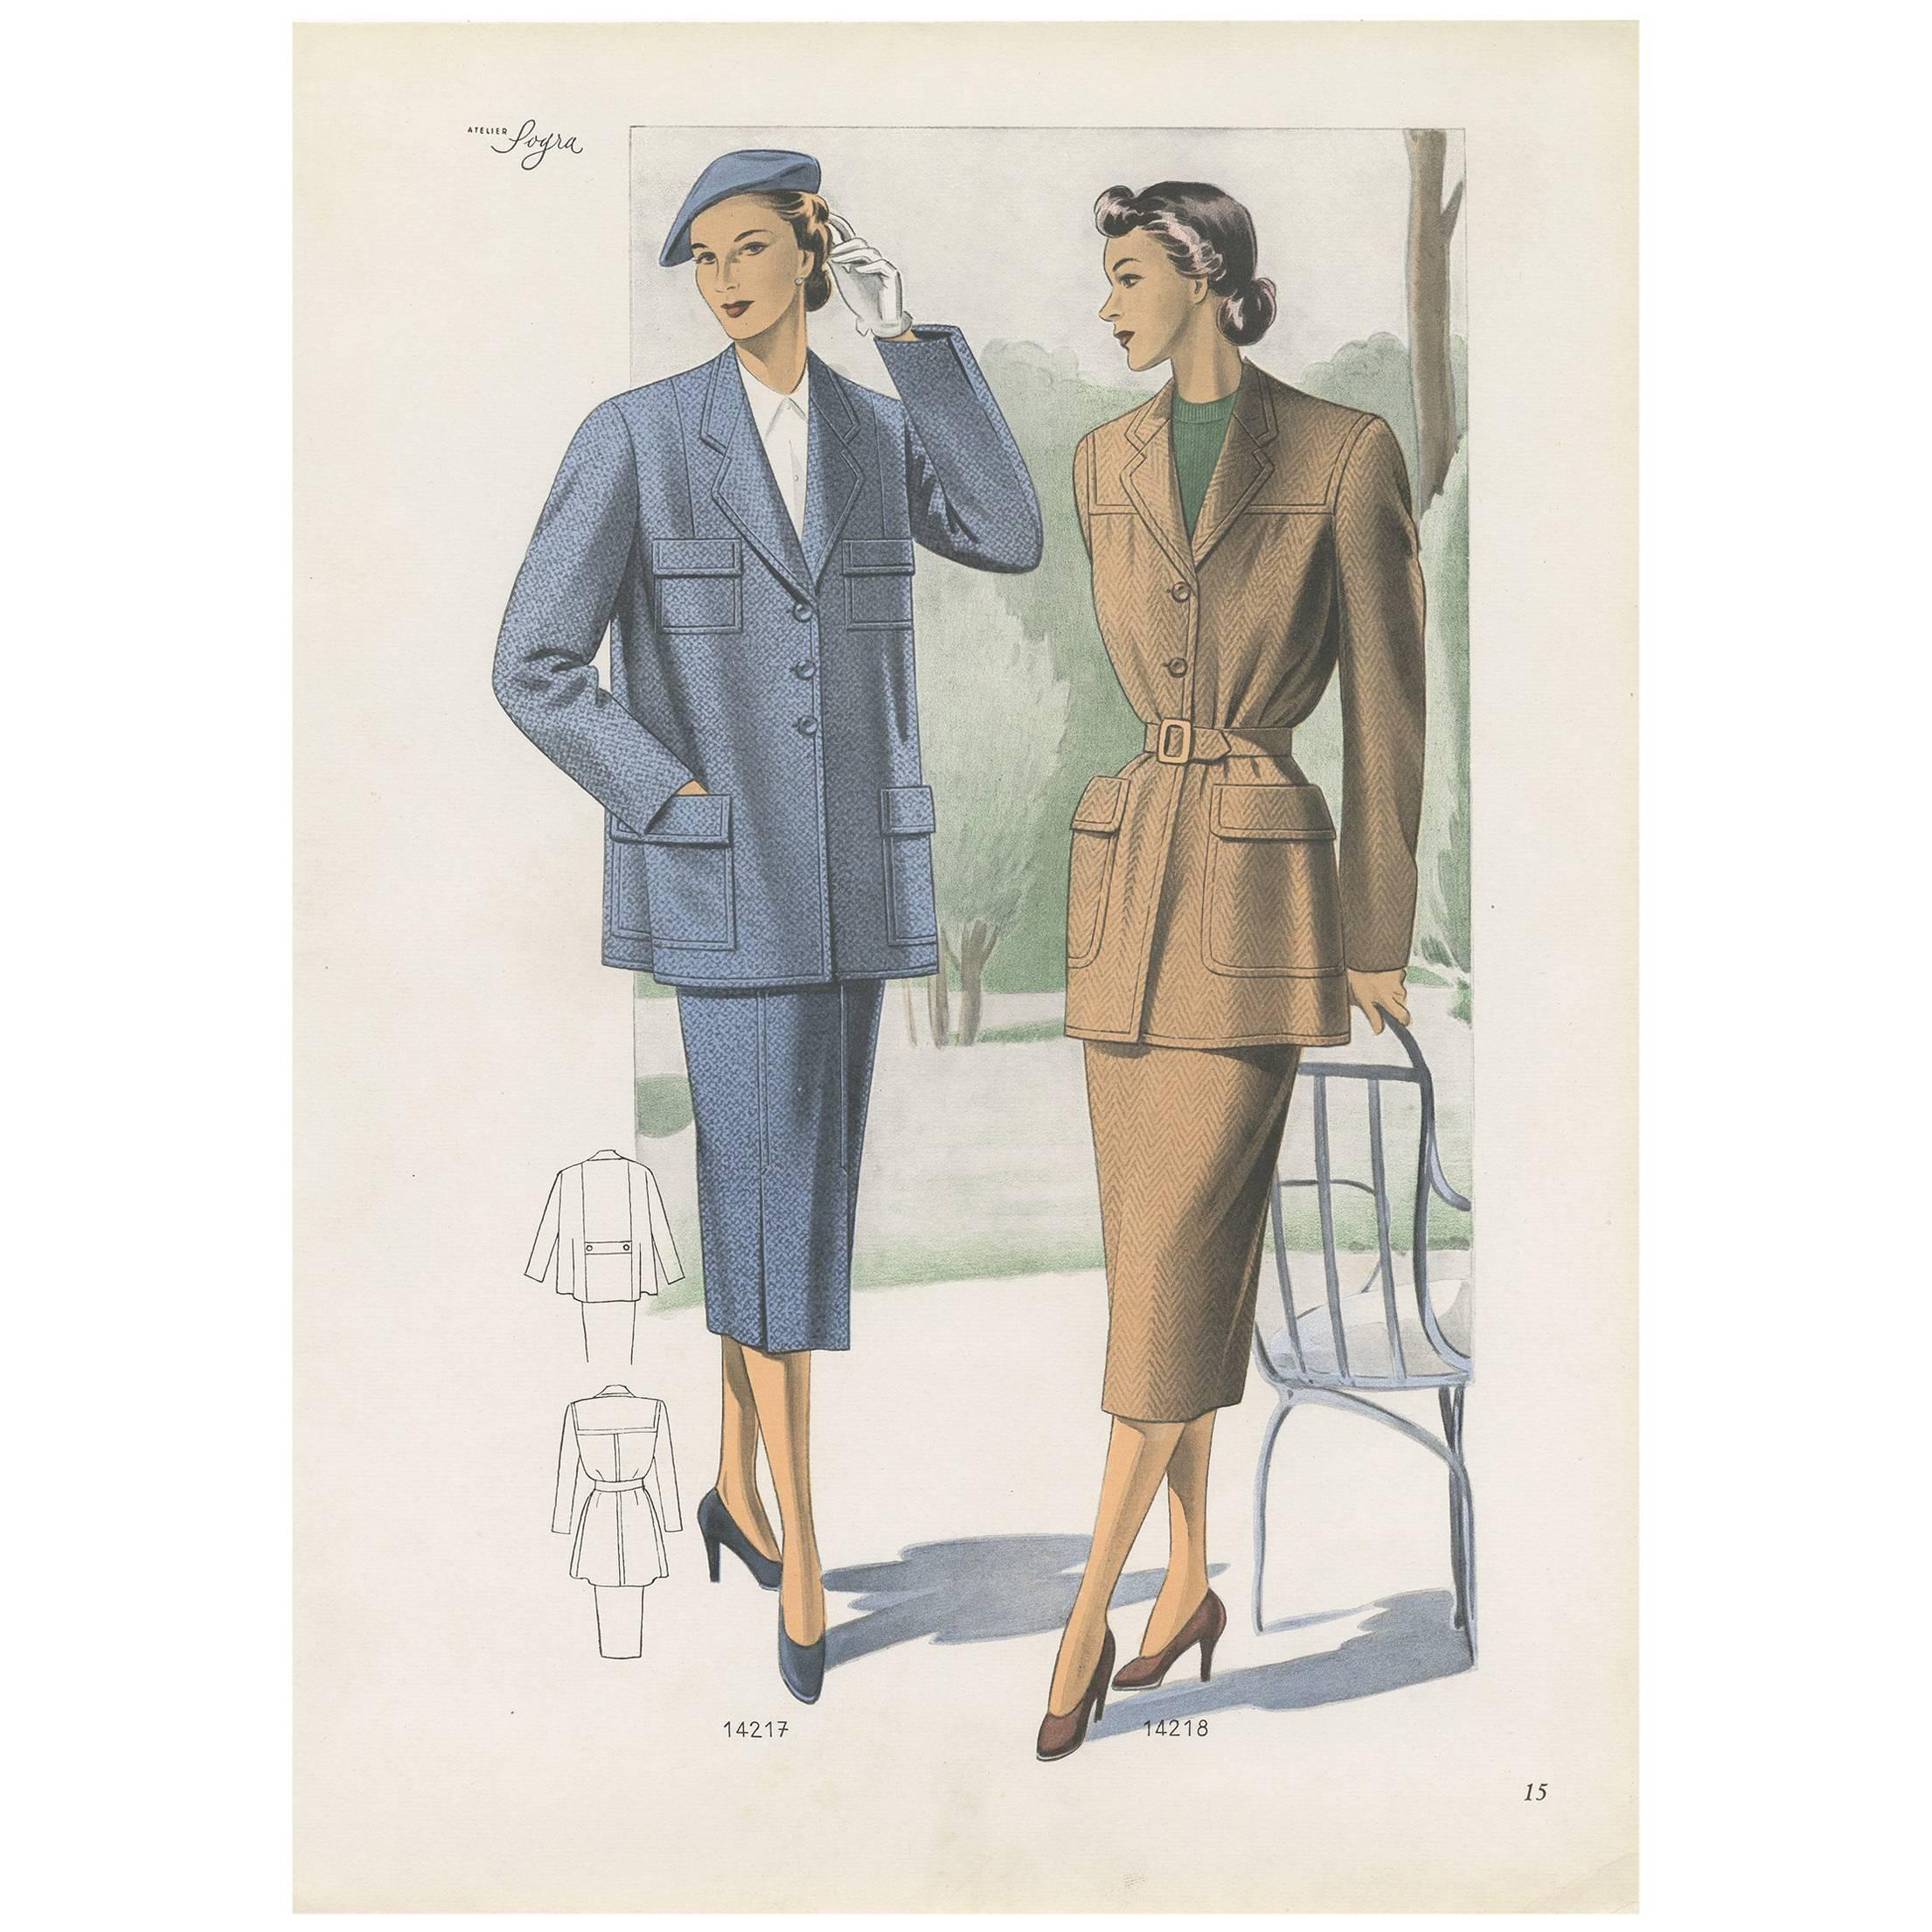 Vintage Fashion Print 'Pl. 14217' Published in Ladies Styles, 1951 For Sale